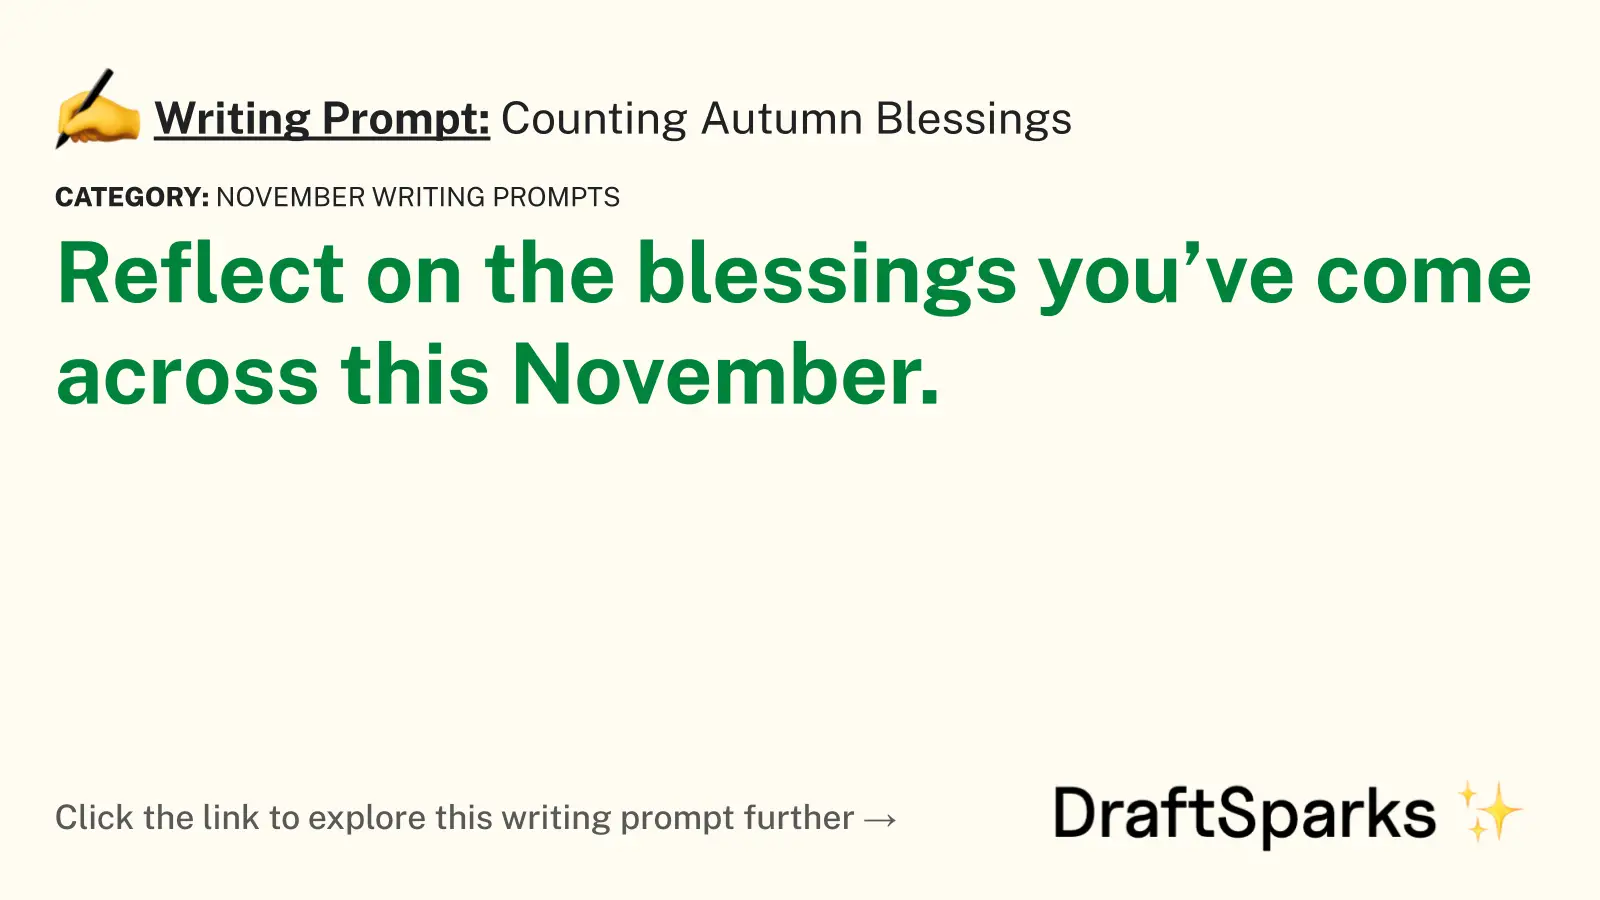 Counting Autumn Blessings